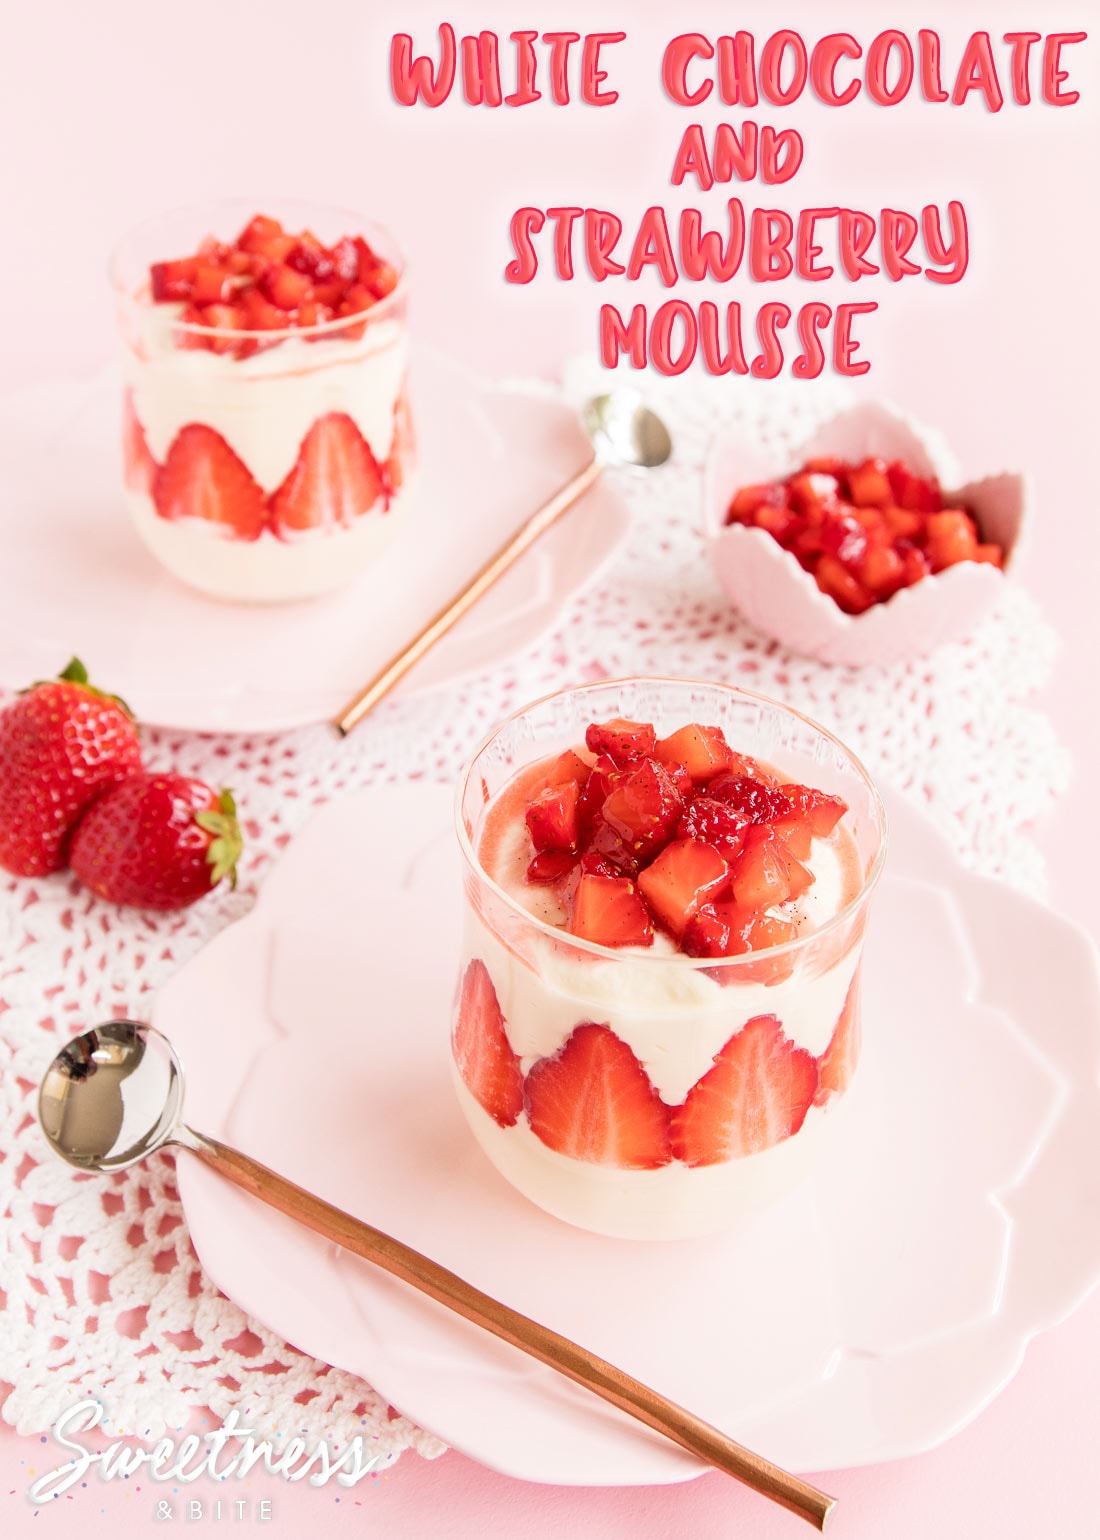 White Chocolate and Strawberry Mousse ~ Super Easy white chocolate mousse with vanilla macerated strawberries. Perfect for Valentine's Day (or any other day, for that matter!) ~ by Sweetness & Bite